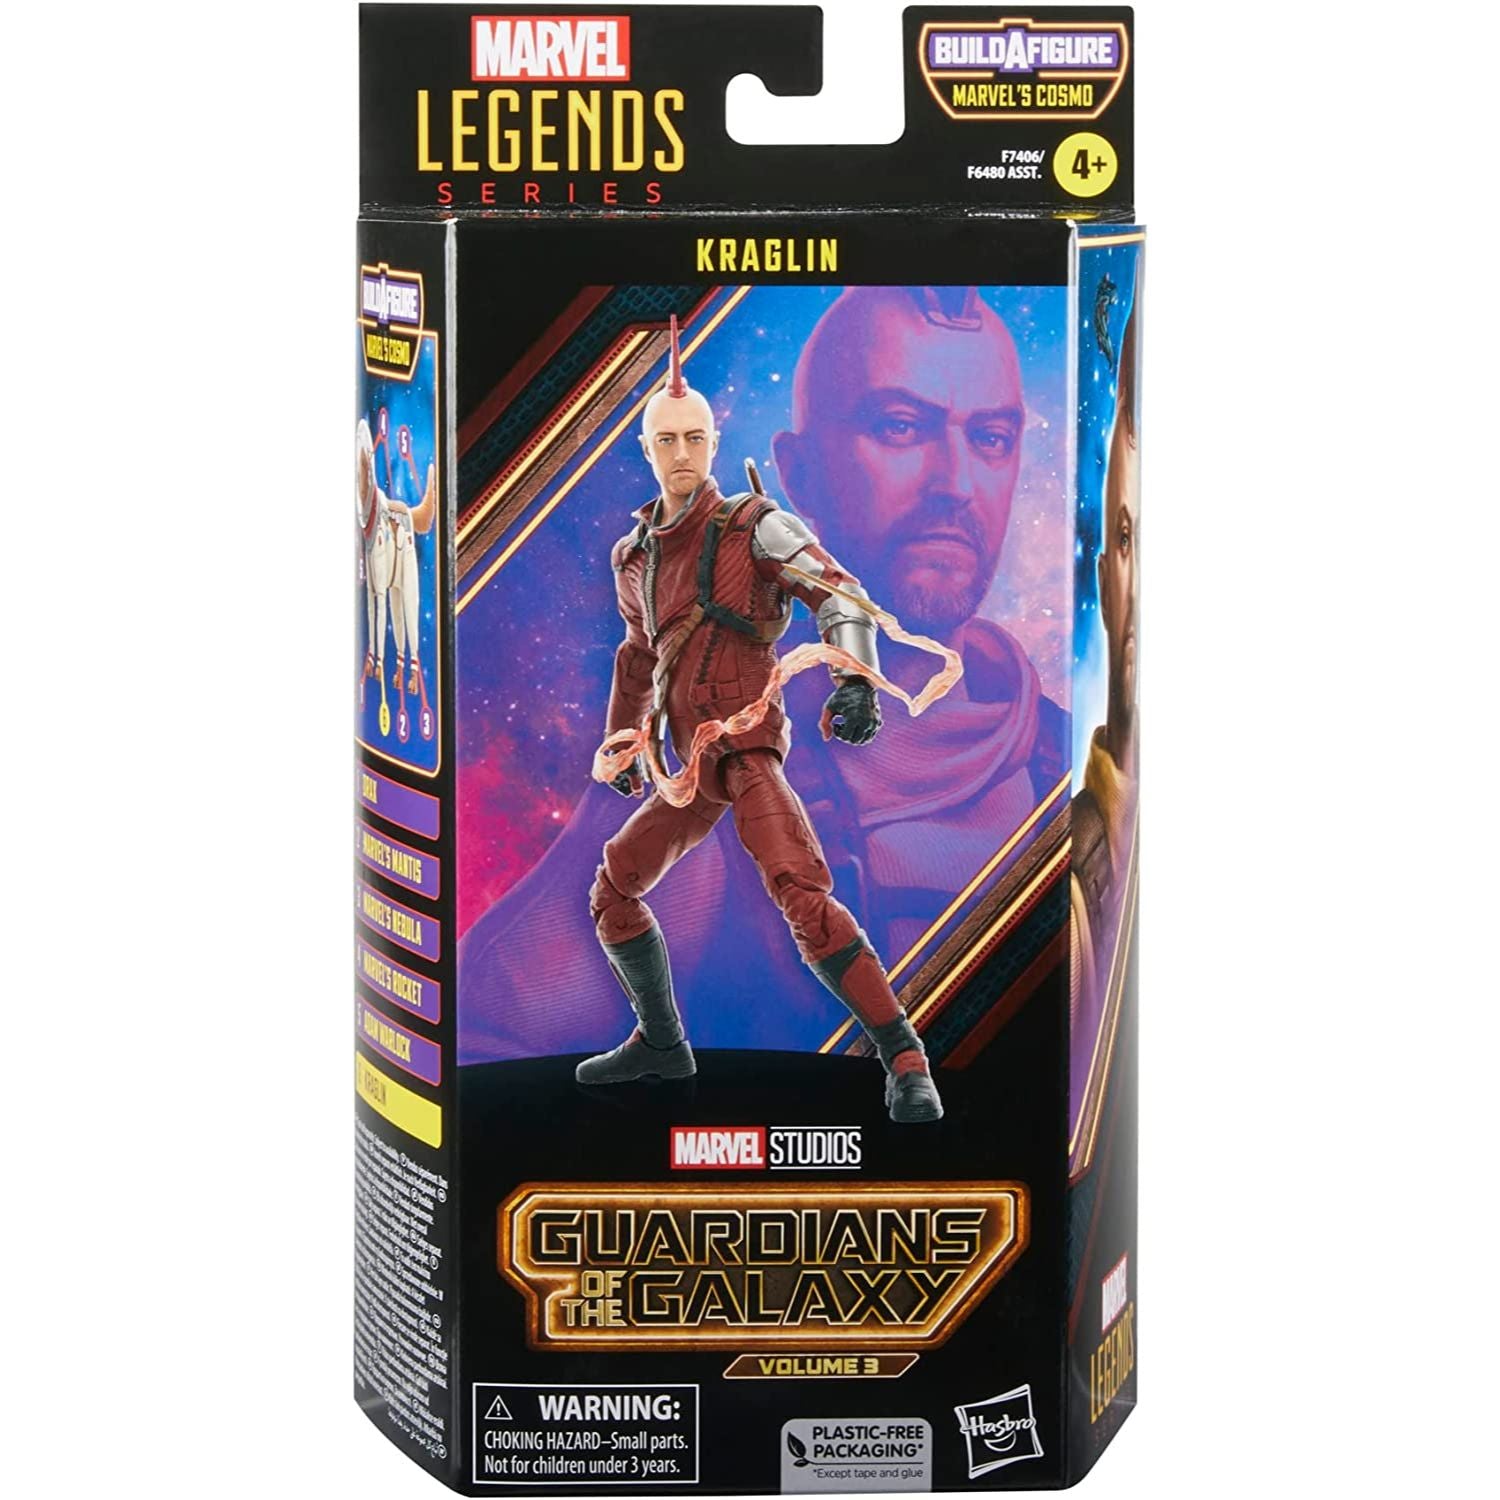 Guardians of the Galaxy Vol. 3 Marvel Legends Kraglin 6-Inch Action Figure front view - Heretoserveyou